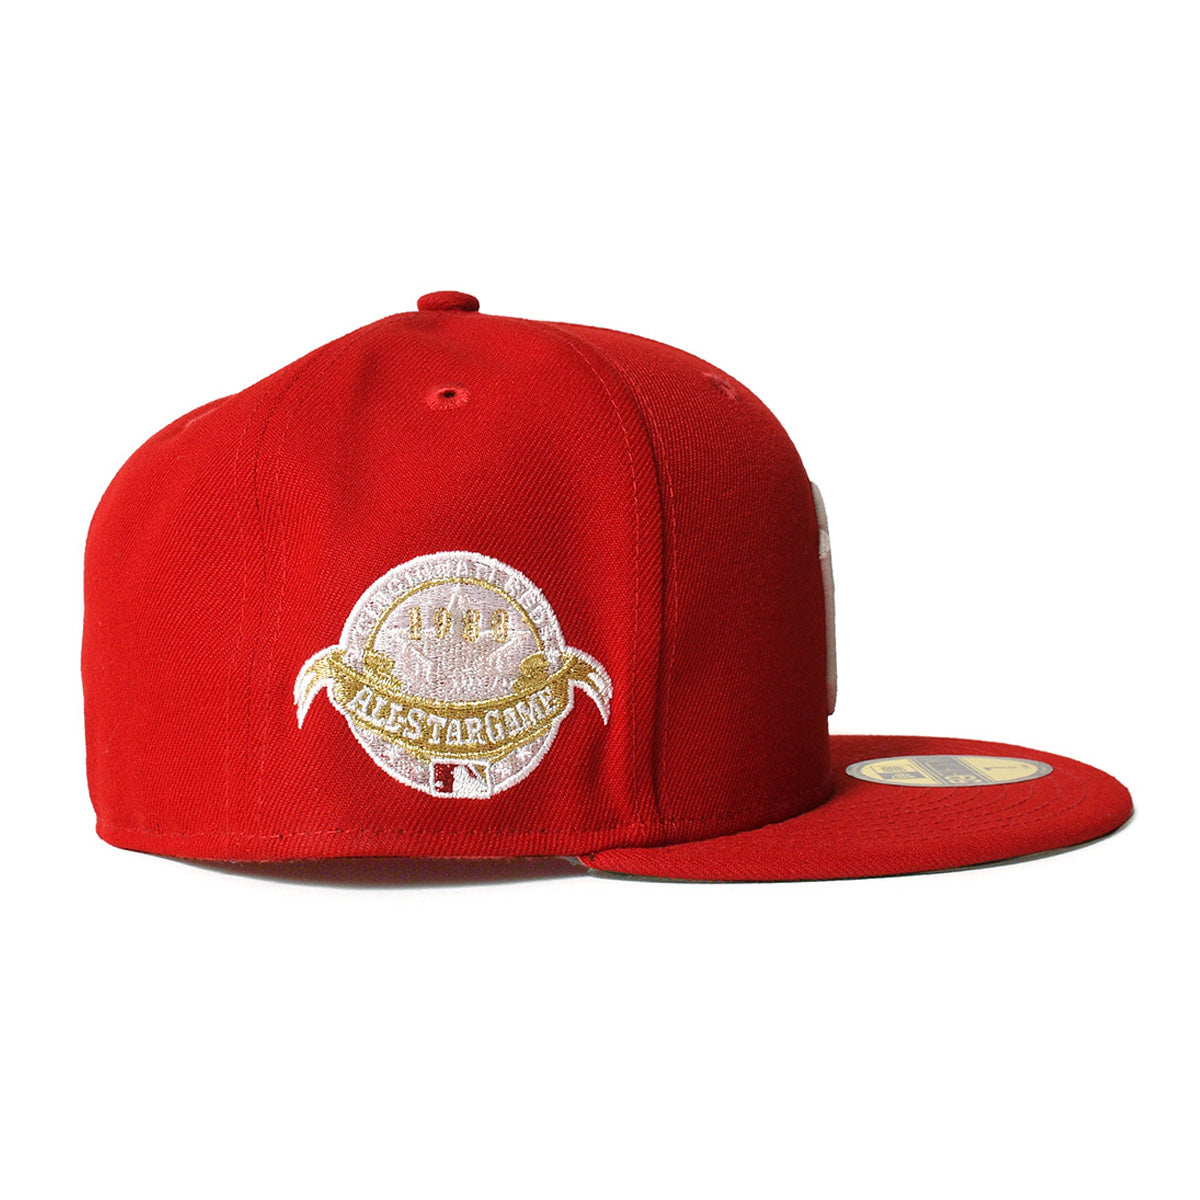 NEW ERA New York Yankees - 59FIFTY 1988 ALL STAR GAME SCARLET SCARLET